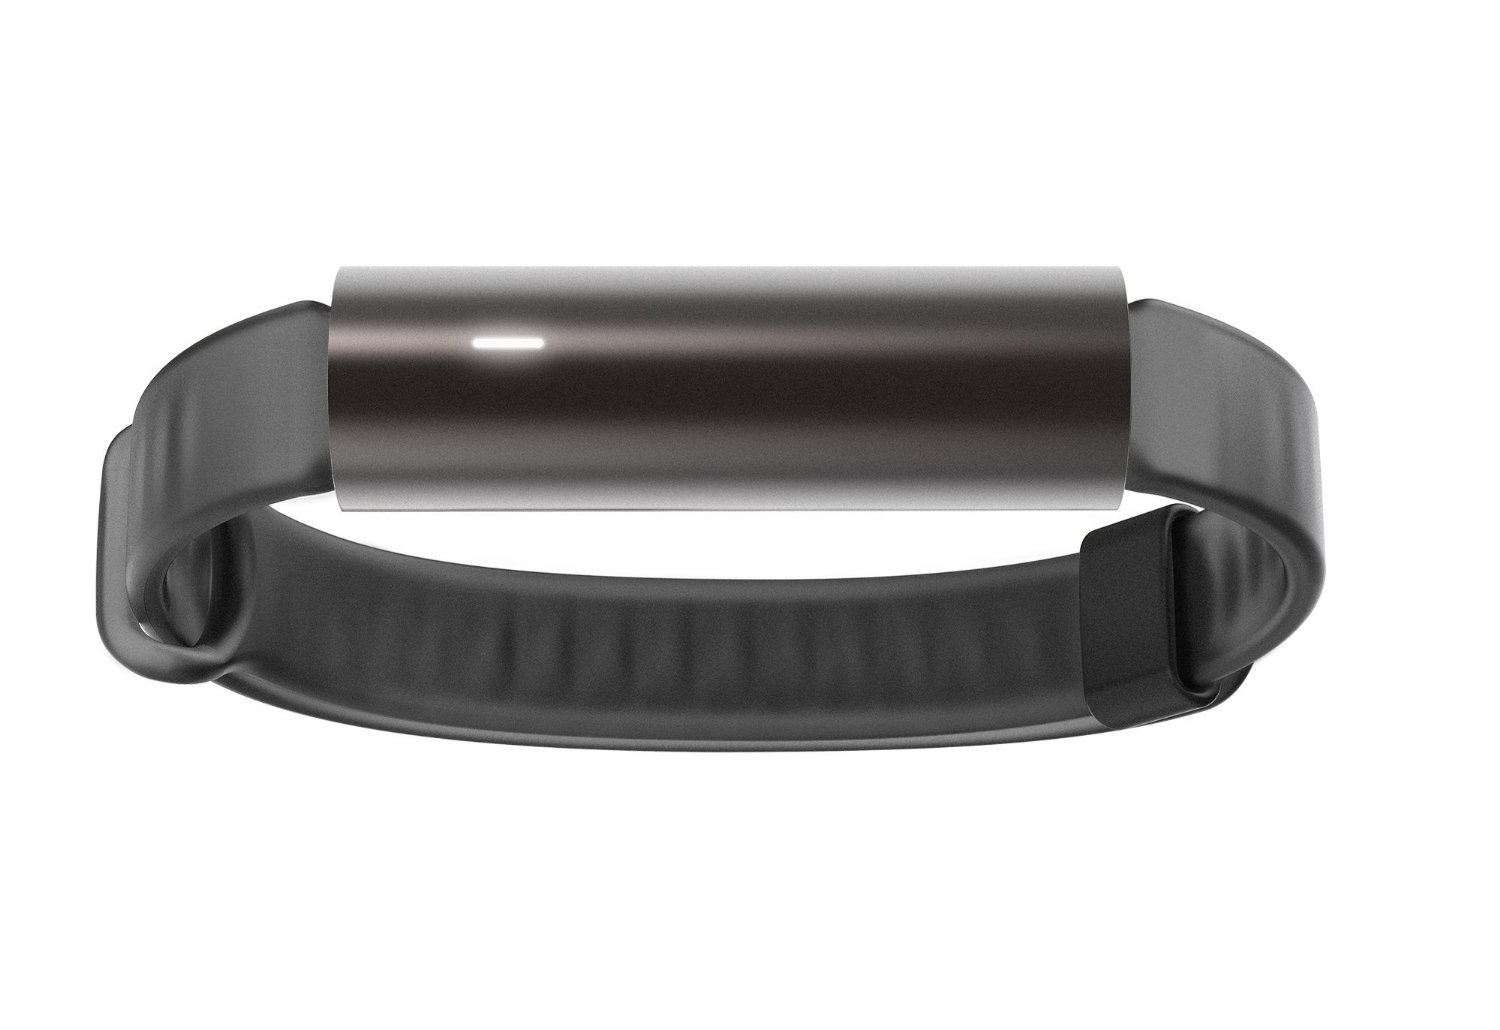 Misfit-Ray-fitness-band